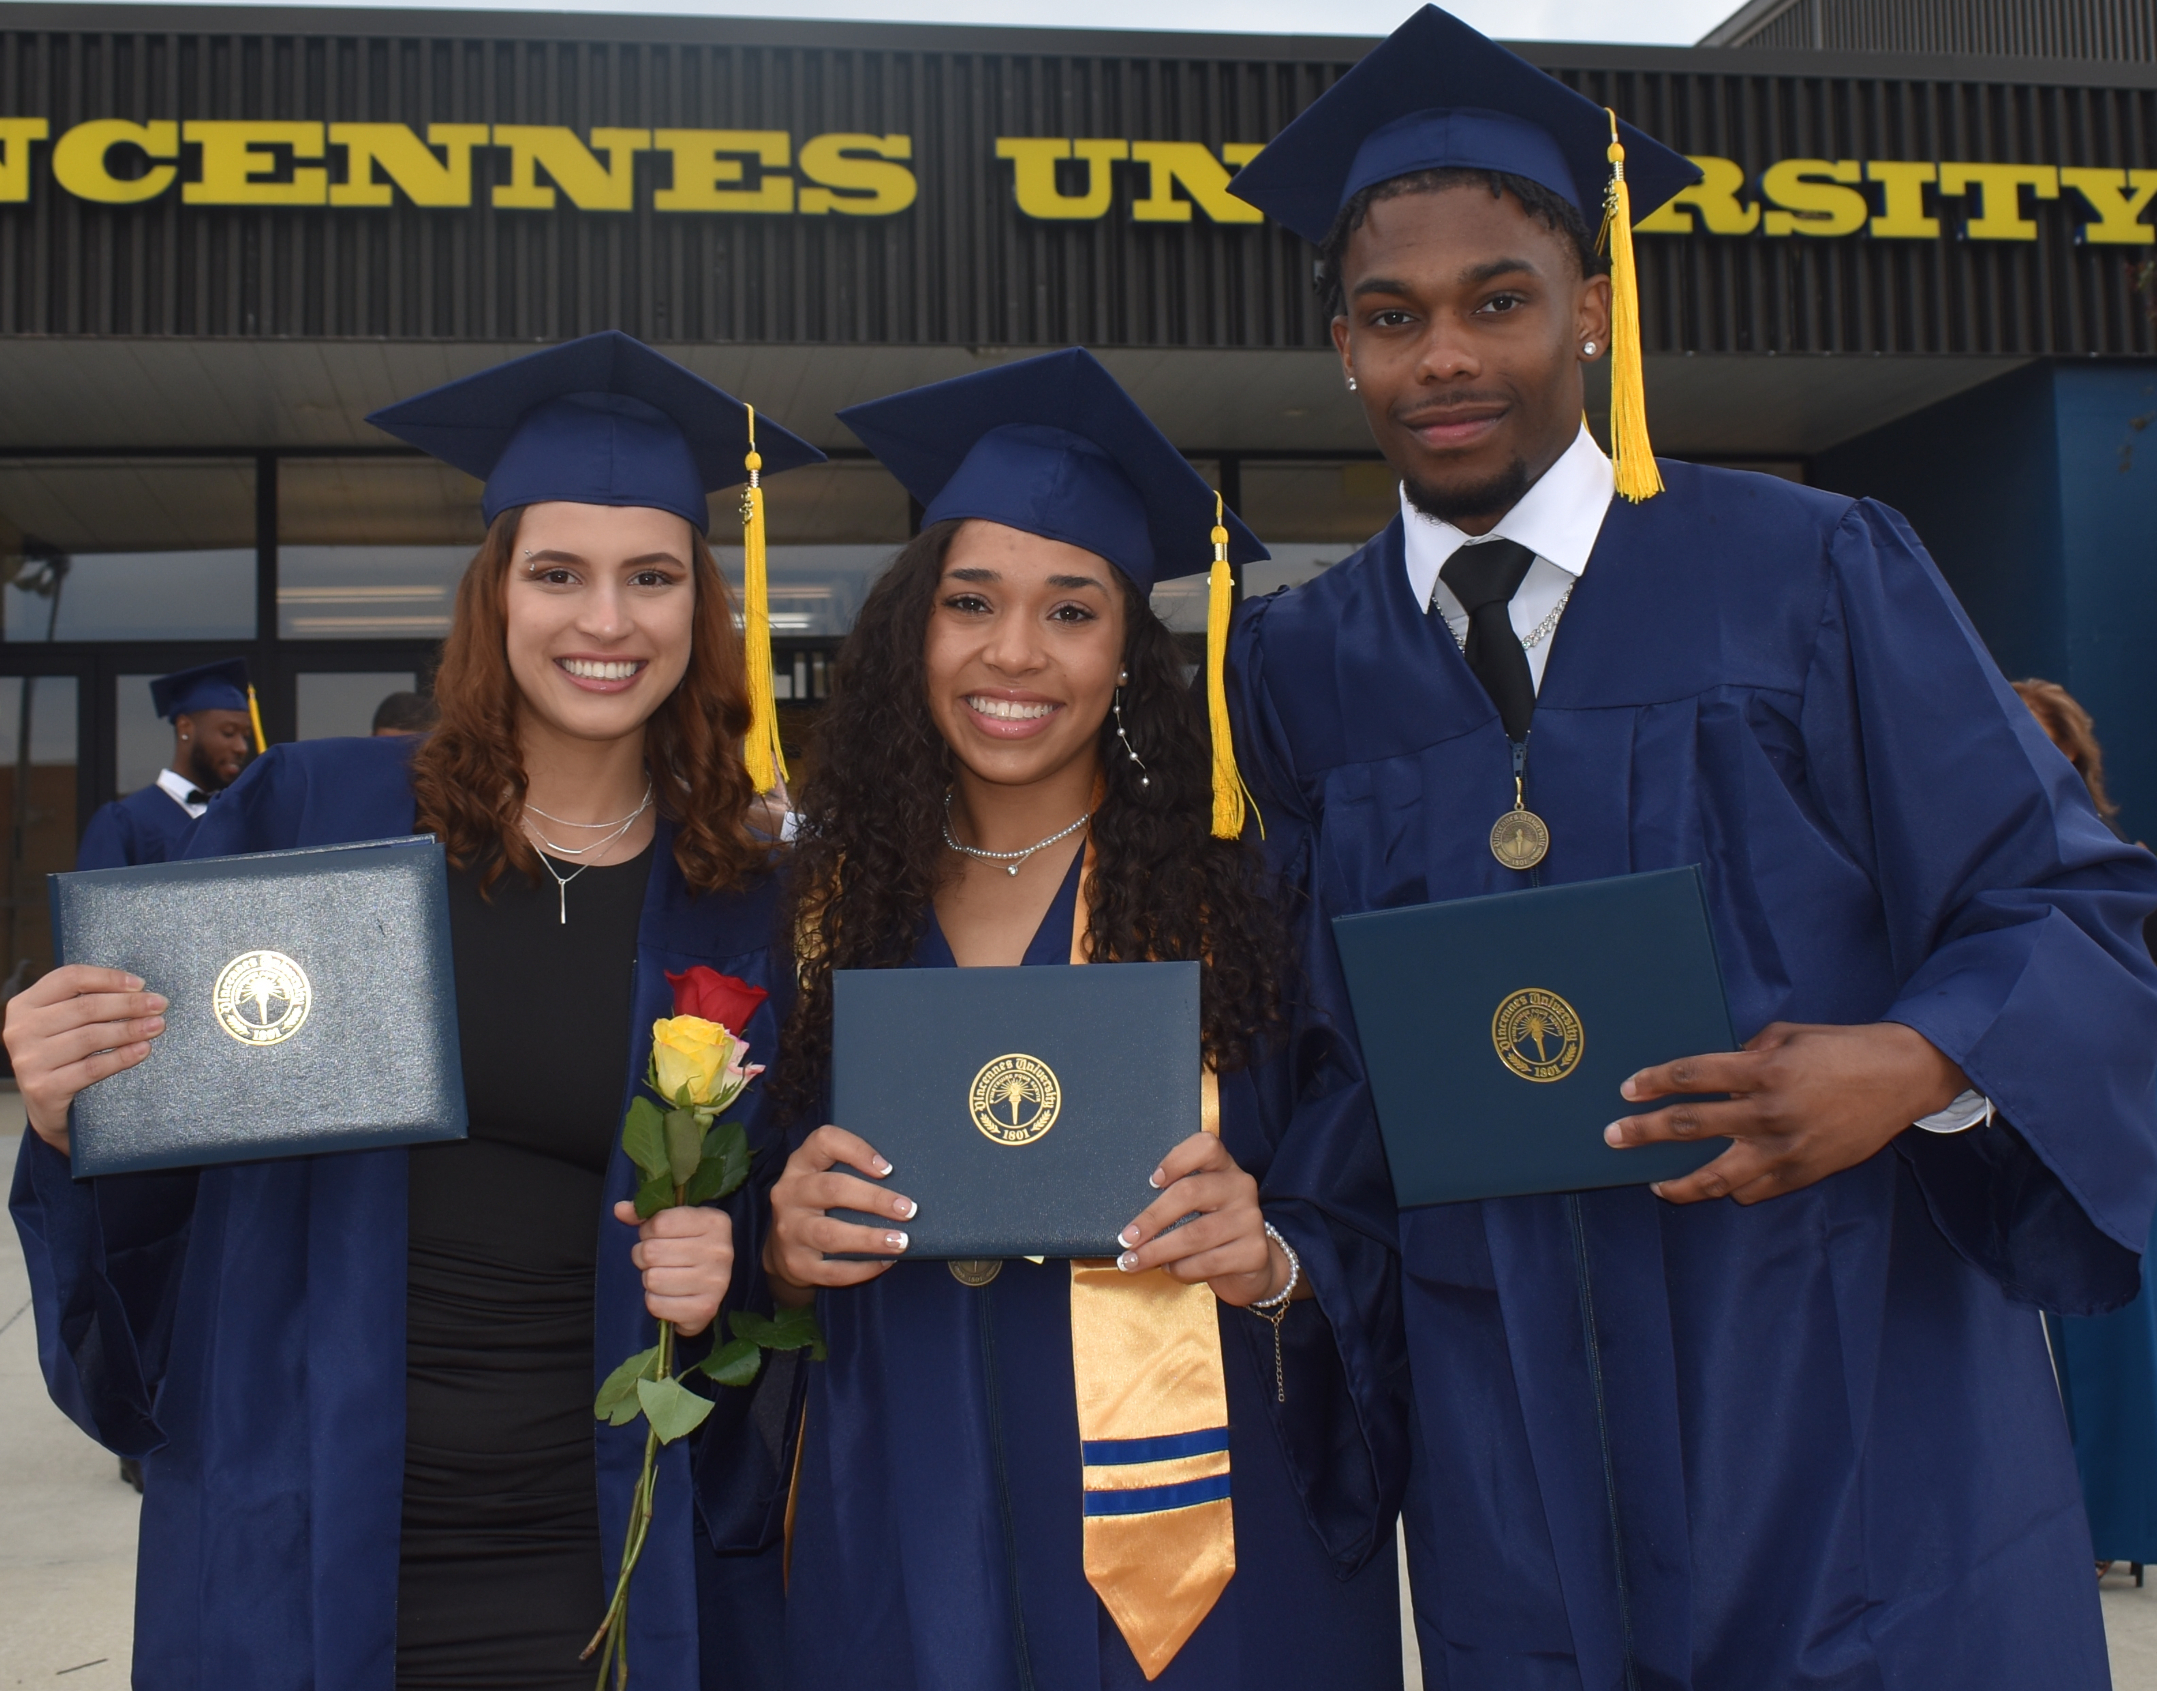 2 female and 1 male VU students wearing graduation caps and gown holding their degrees with a Vincennes University sign behind them.